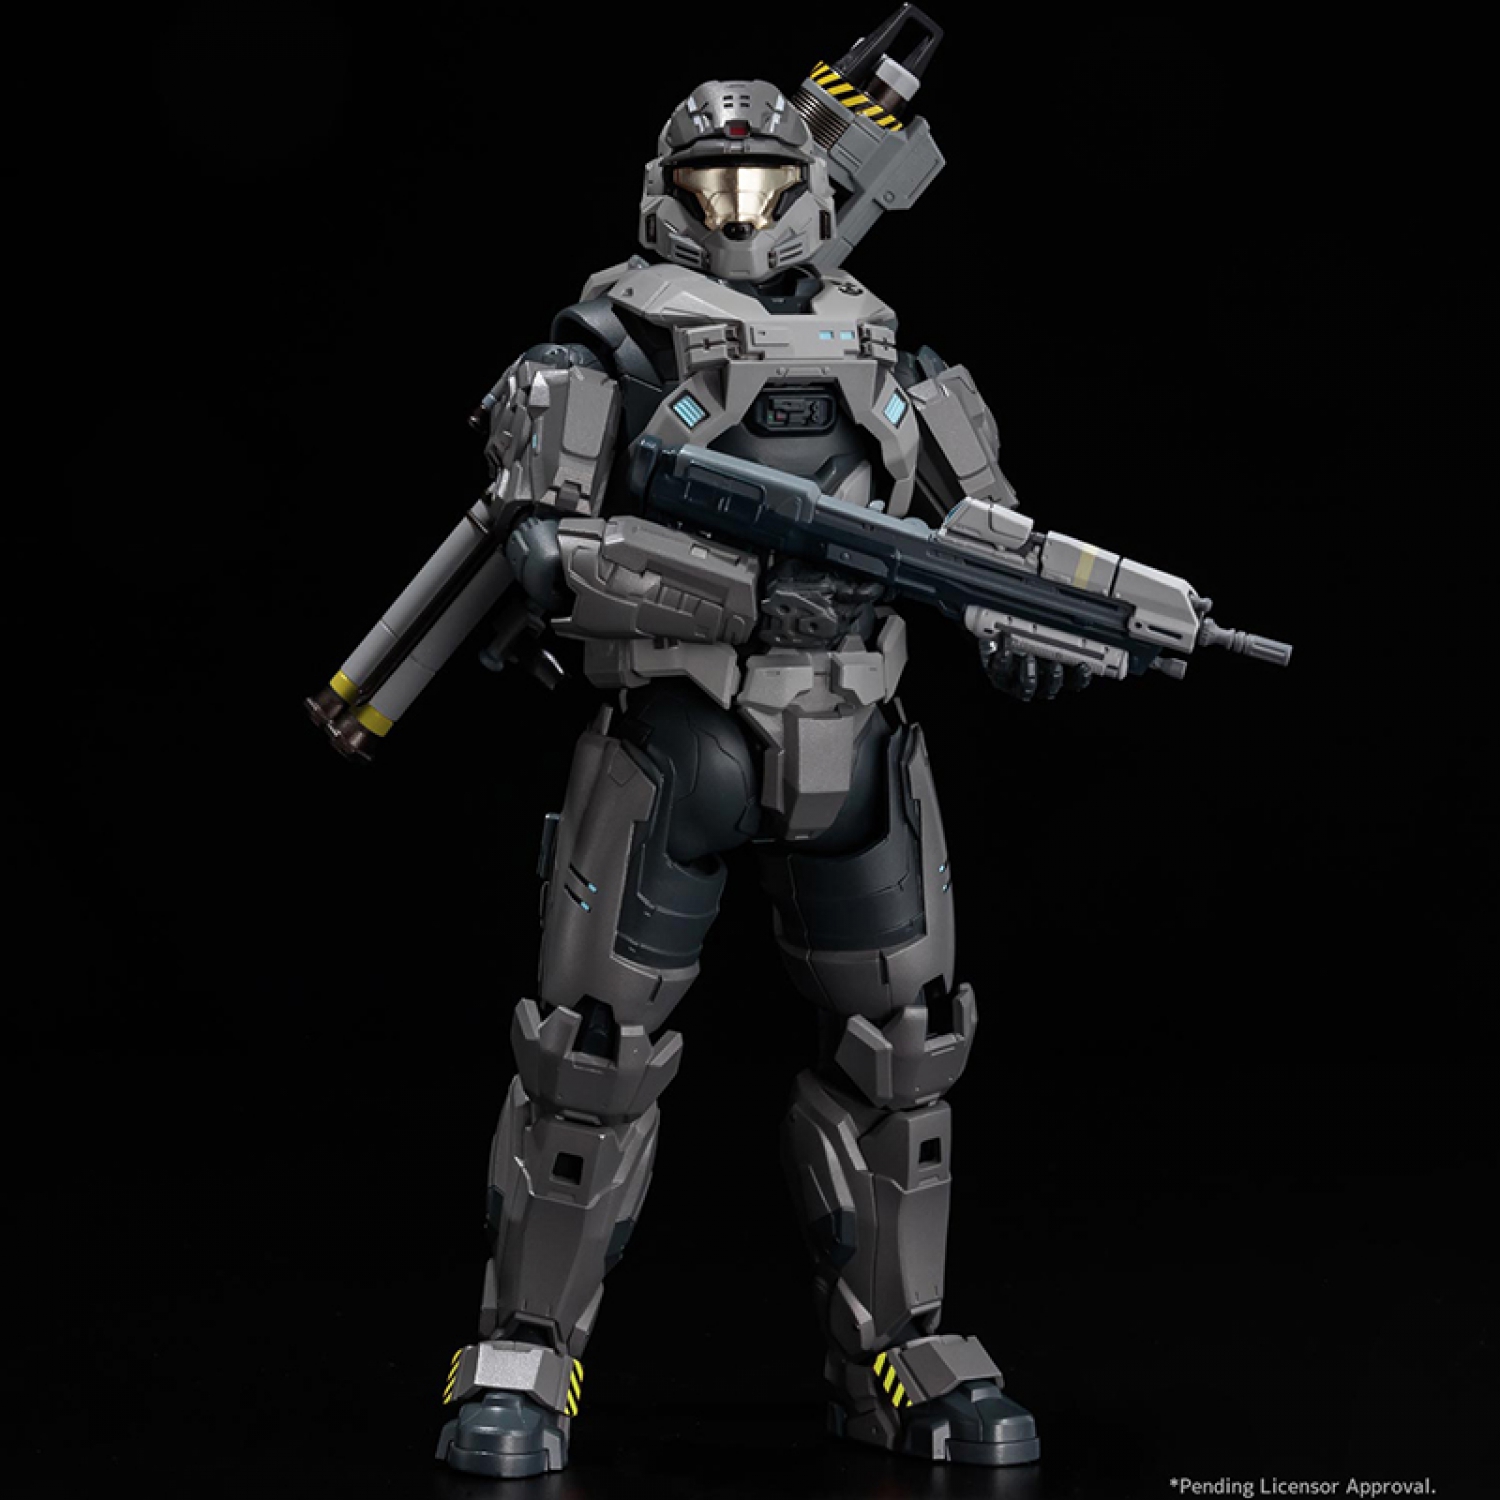 RE:EDIT HALO: REACH 1/12 SCALE SPARTAN-B312 (Noble Six) EXCLUSIVE EDITION